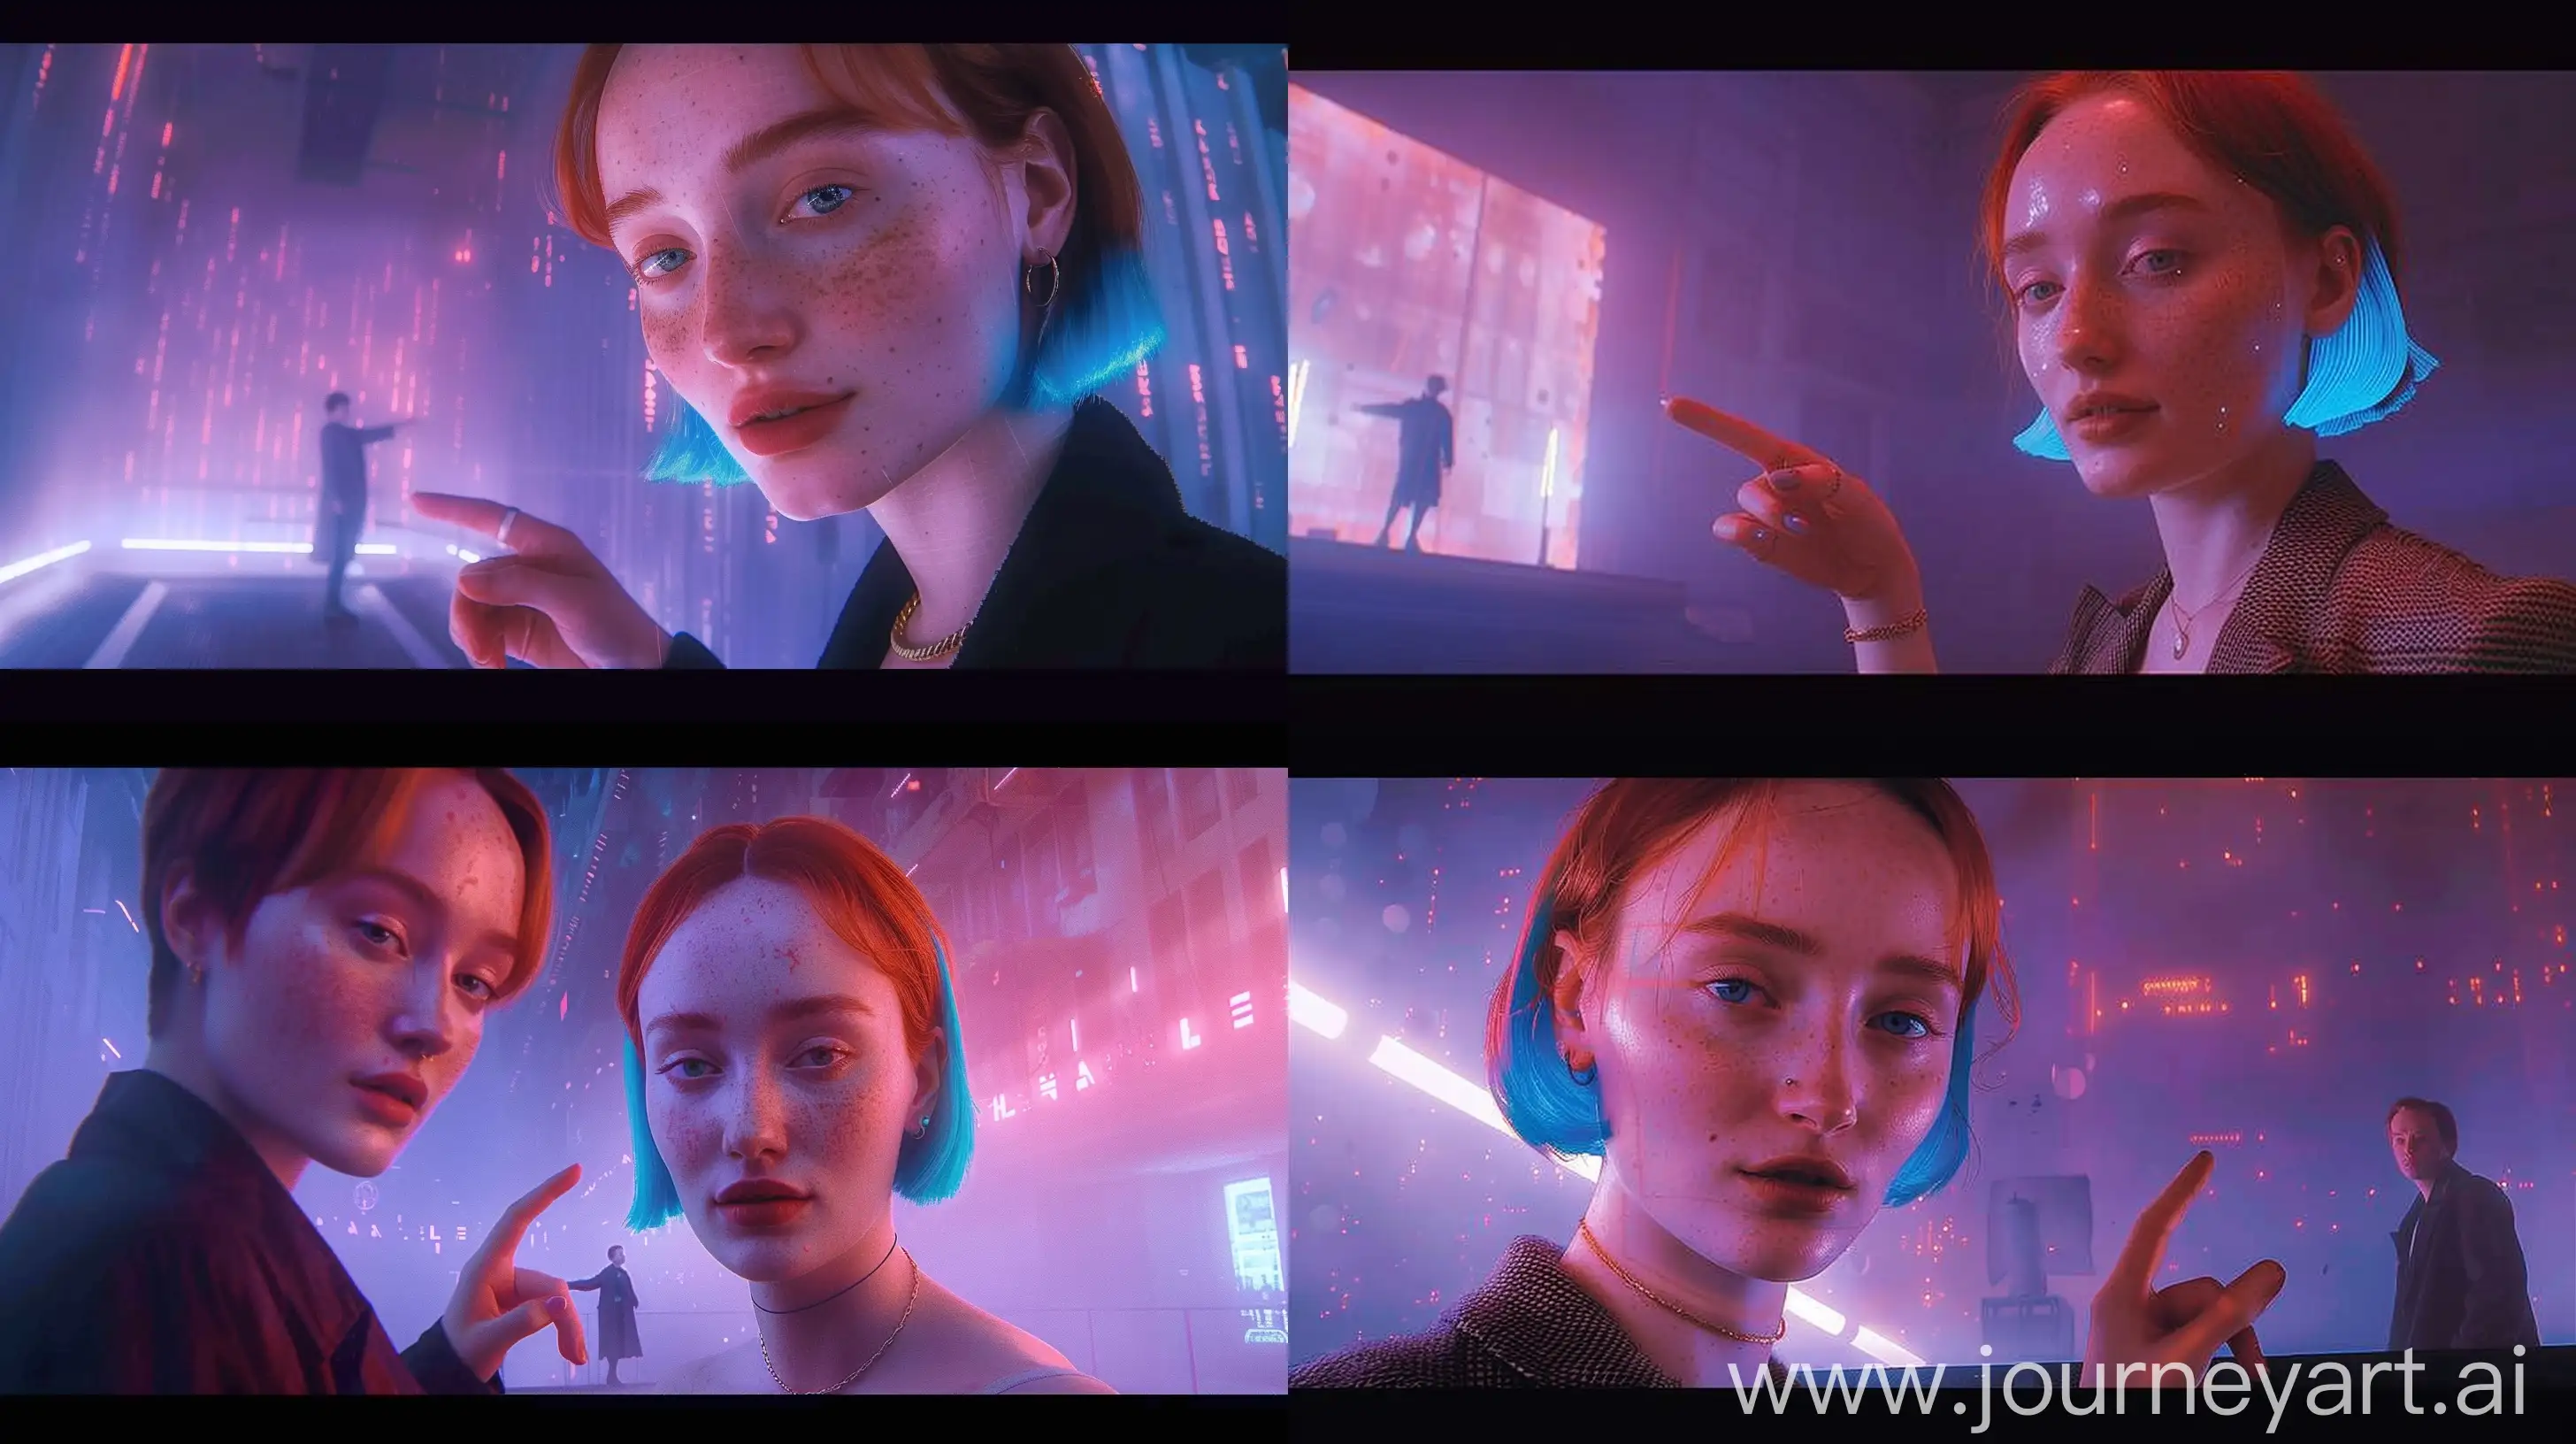 Futuristic-Cyberpunk-Cityscape-with-Holographic-Woman-and-Neon-Blue-Bob-Hair